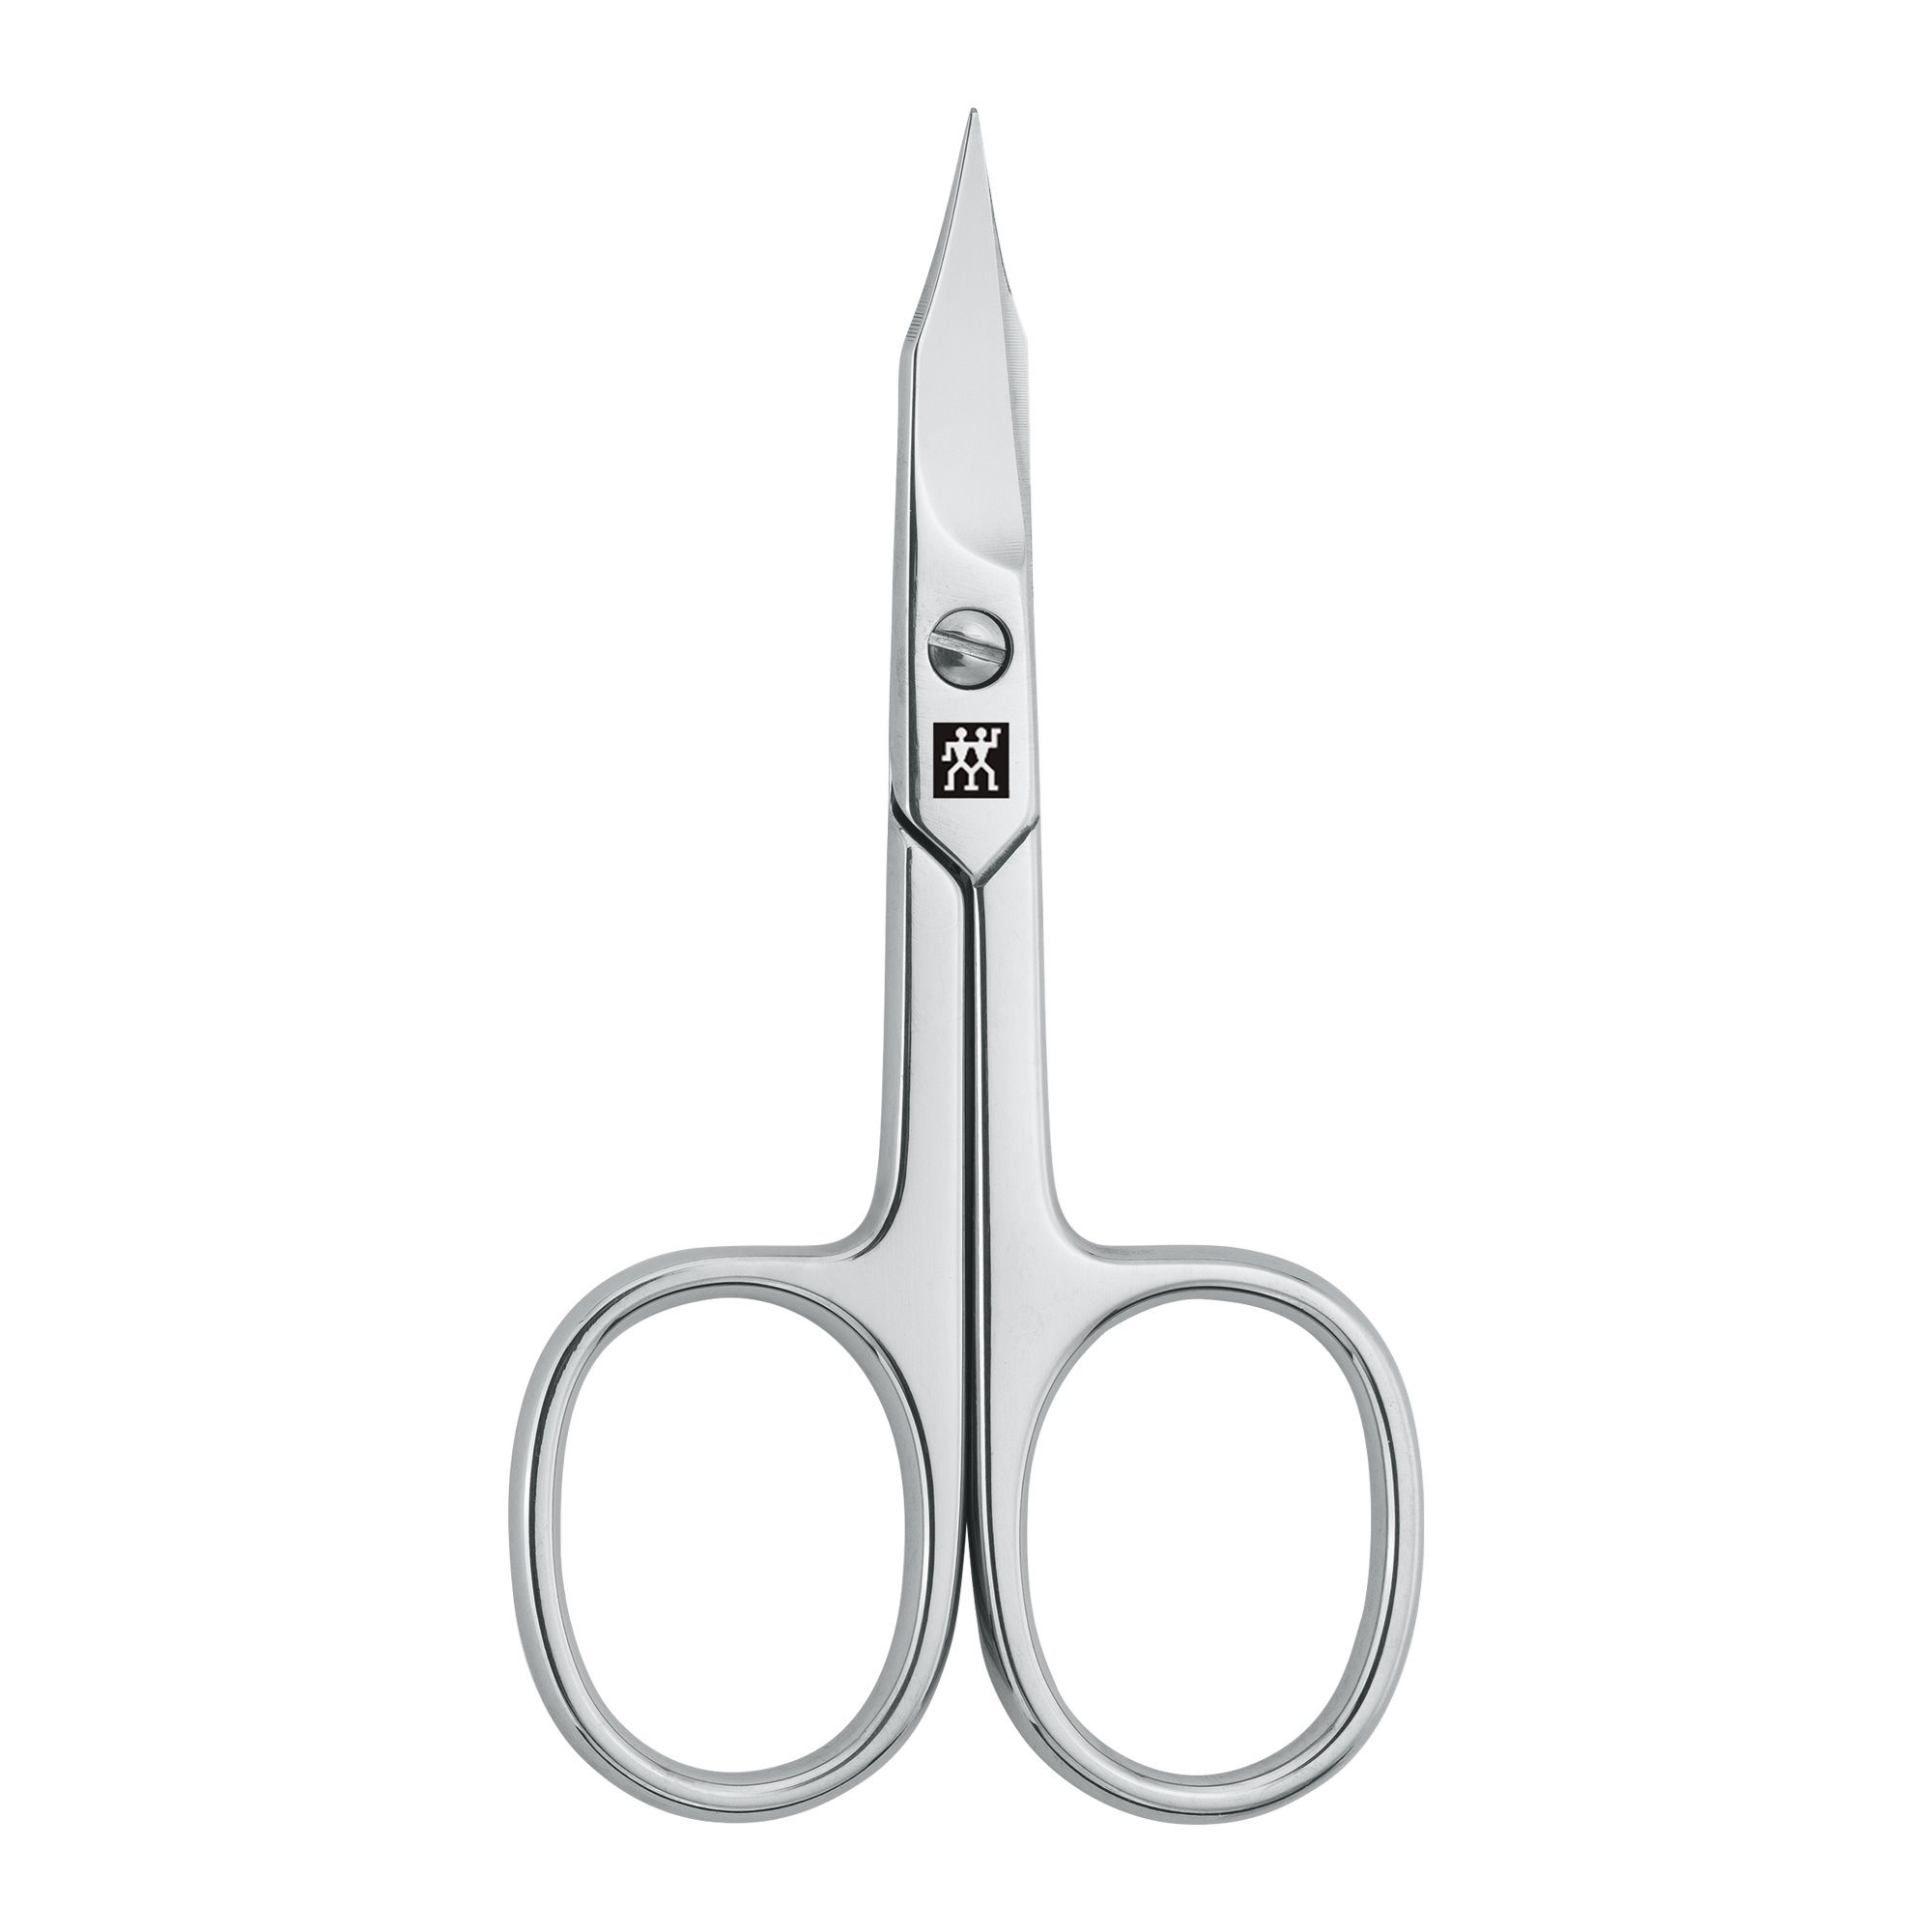 Nail and cuticle scissor, TWIN Classic - Zwilling | KitchenShop